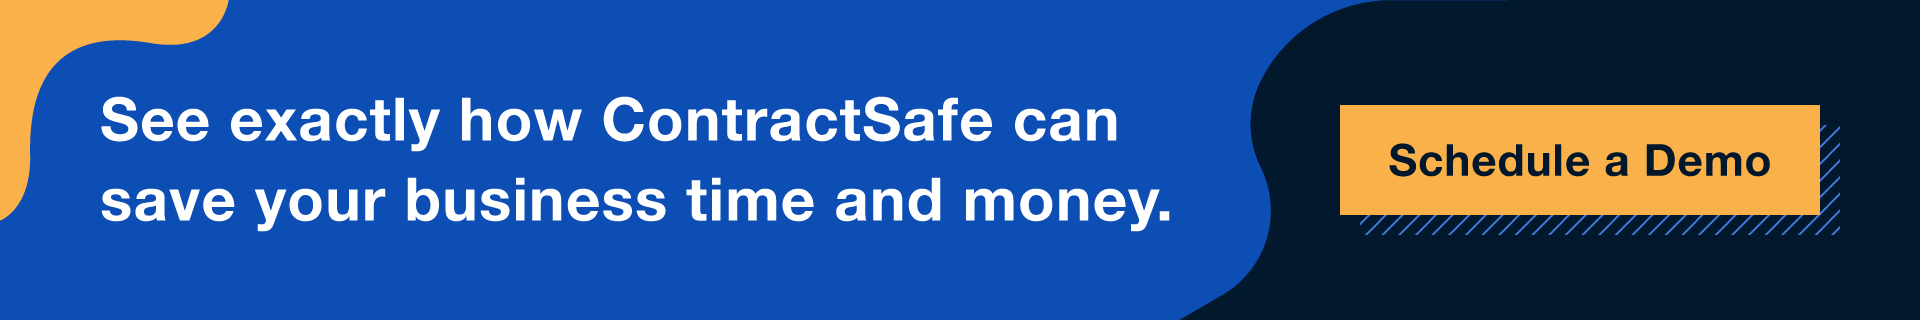 click here to schedule a demo with ContractSafe